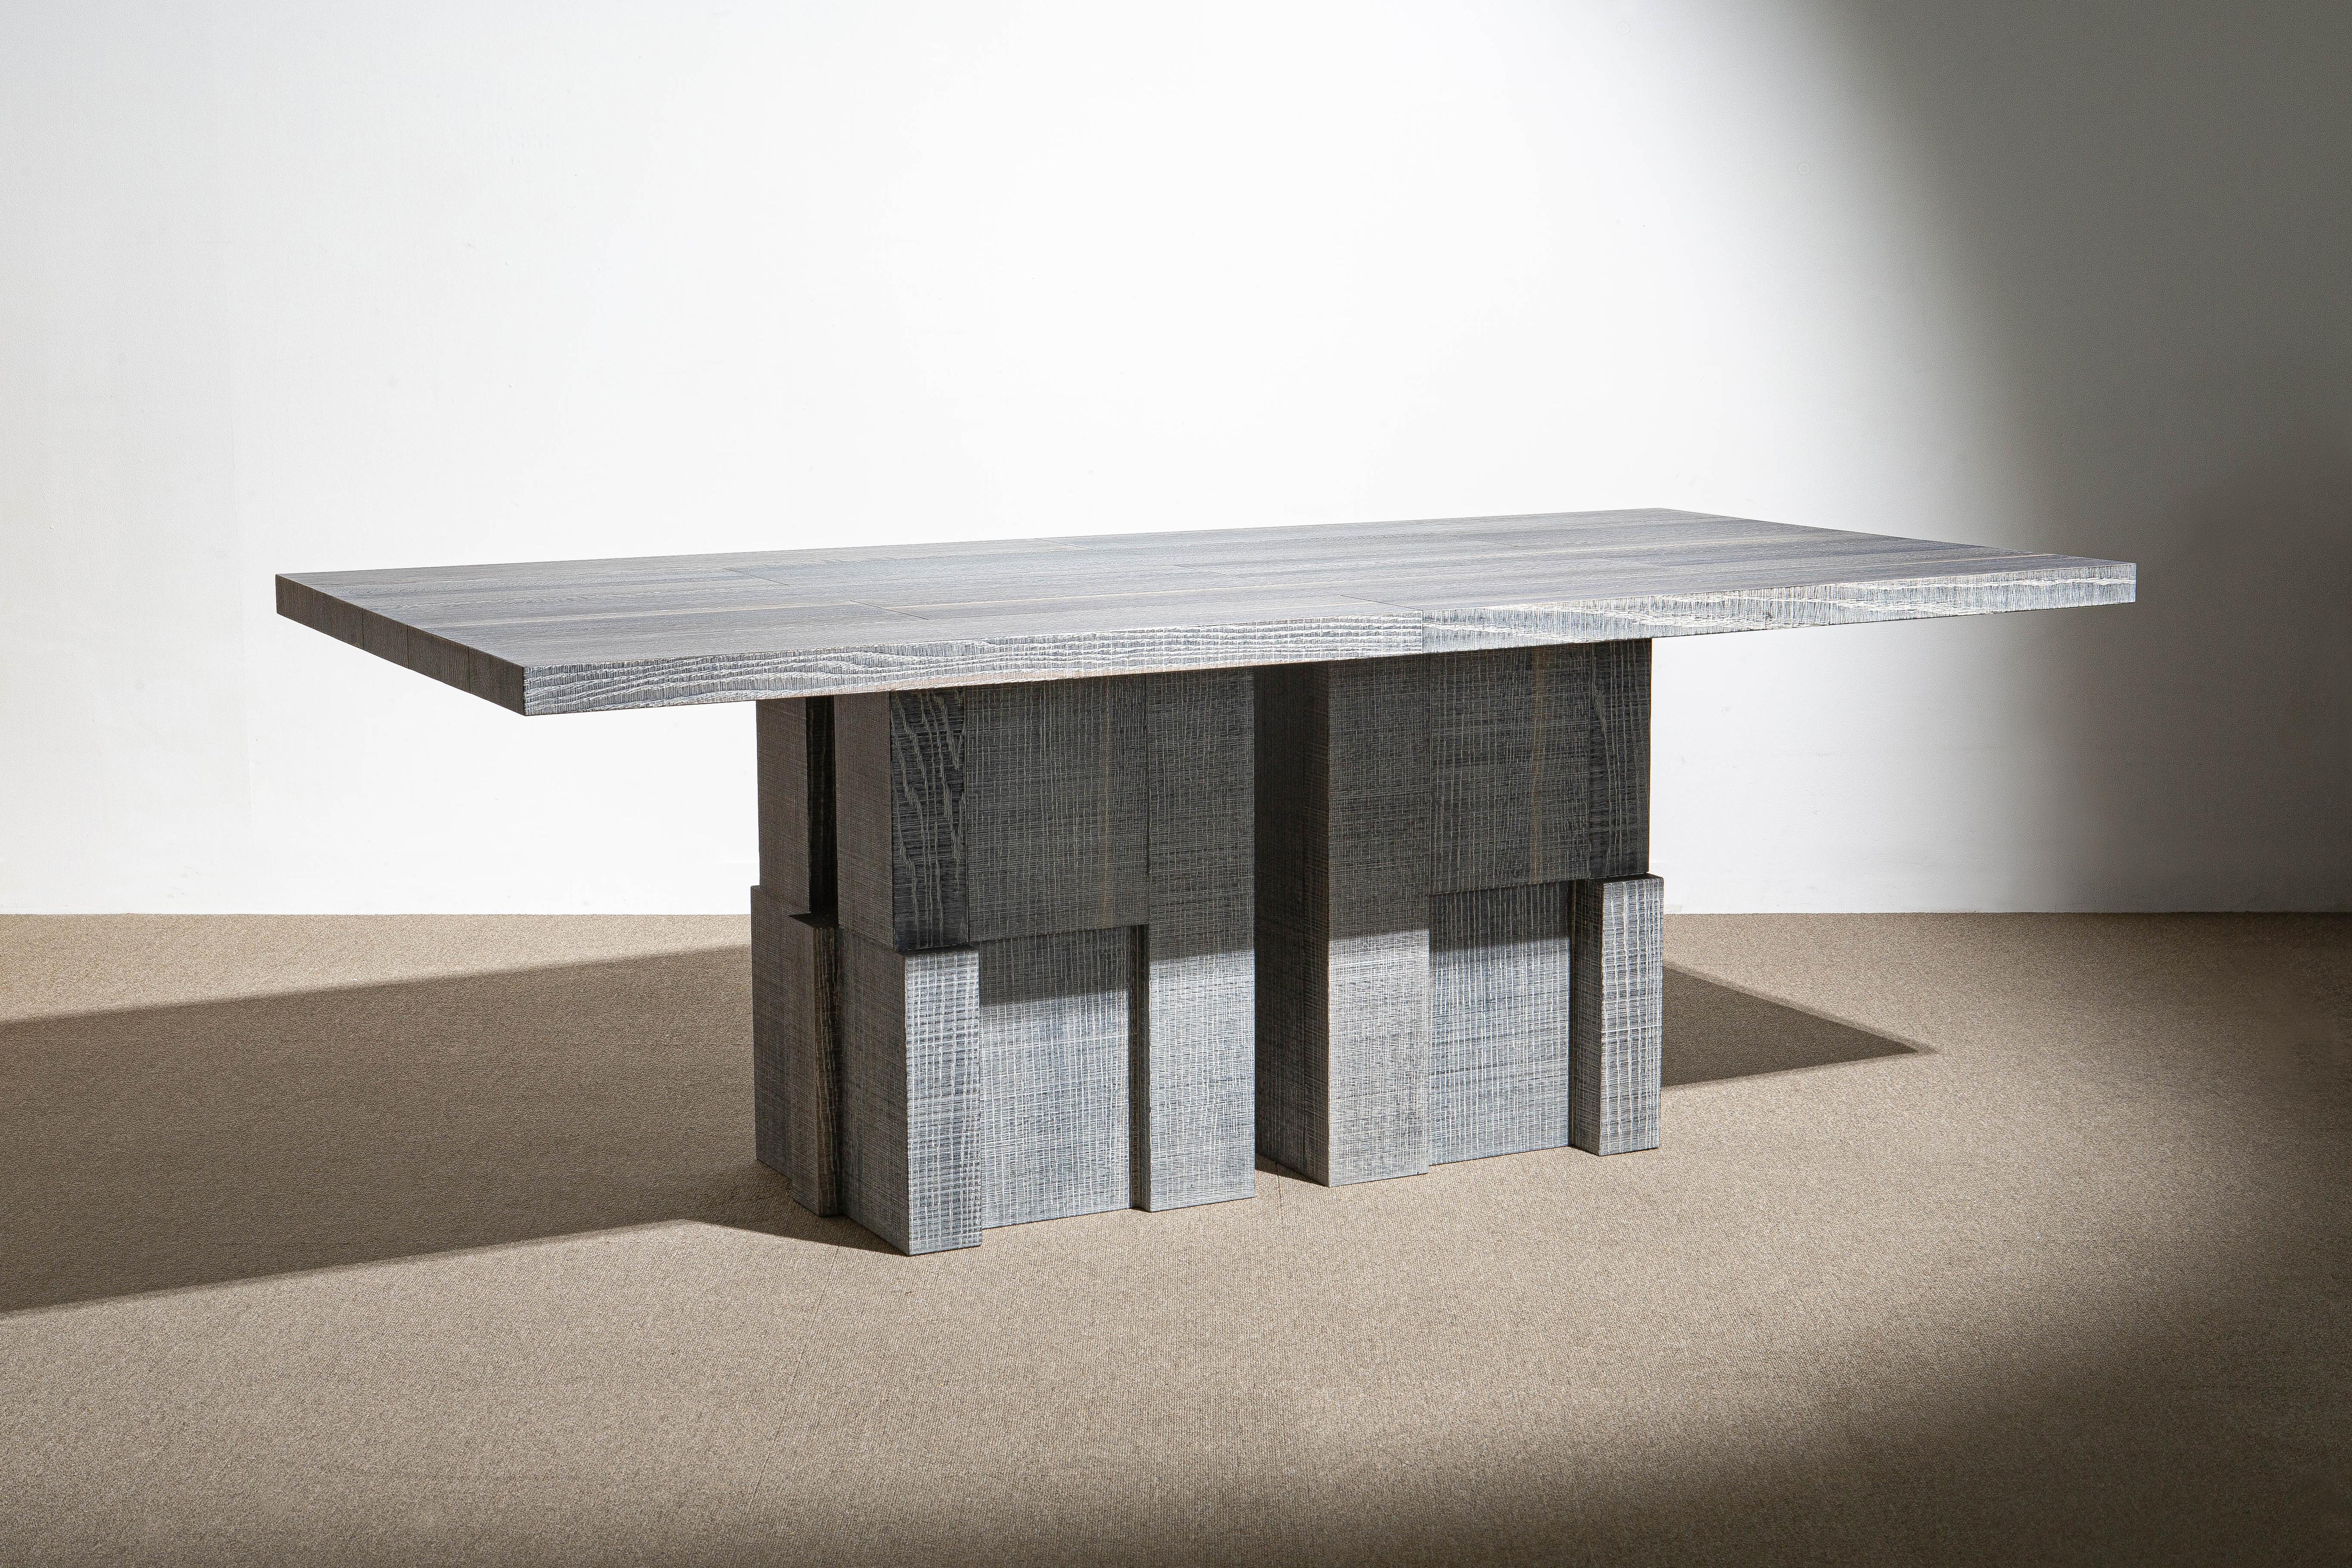 White Layered oak wood table by Hyungshin Hwang
Dimensions: D 200 x W 100 x H 75 cm
Materials: oxidized red oak

Layered Series is the main theme and concept of work of Hwang, who continues his experiment which is based on architectural